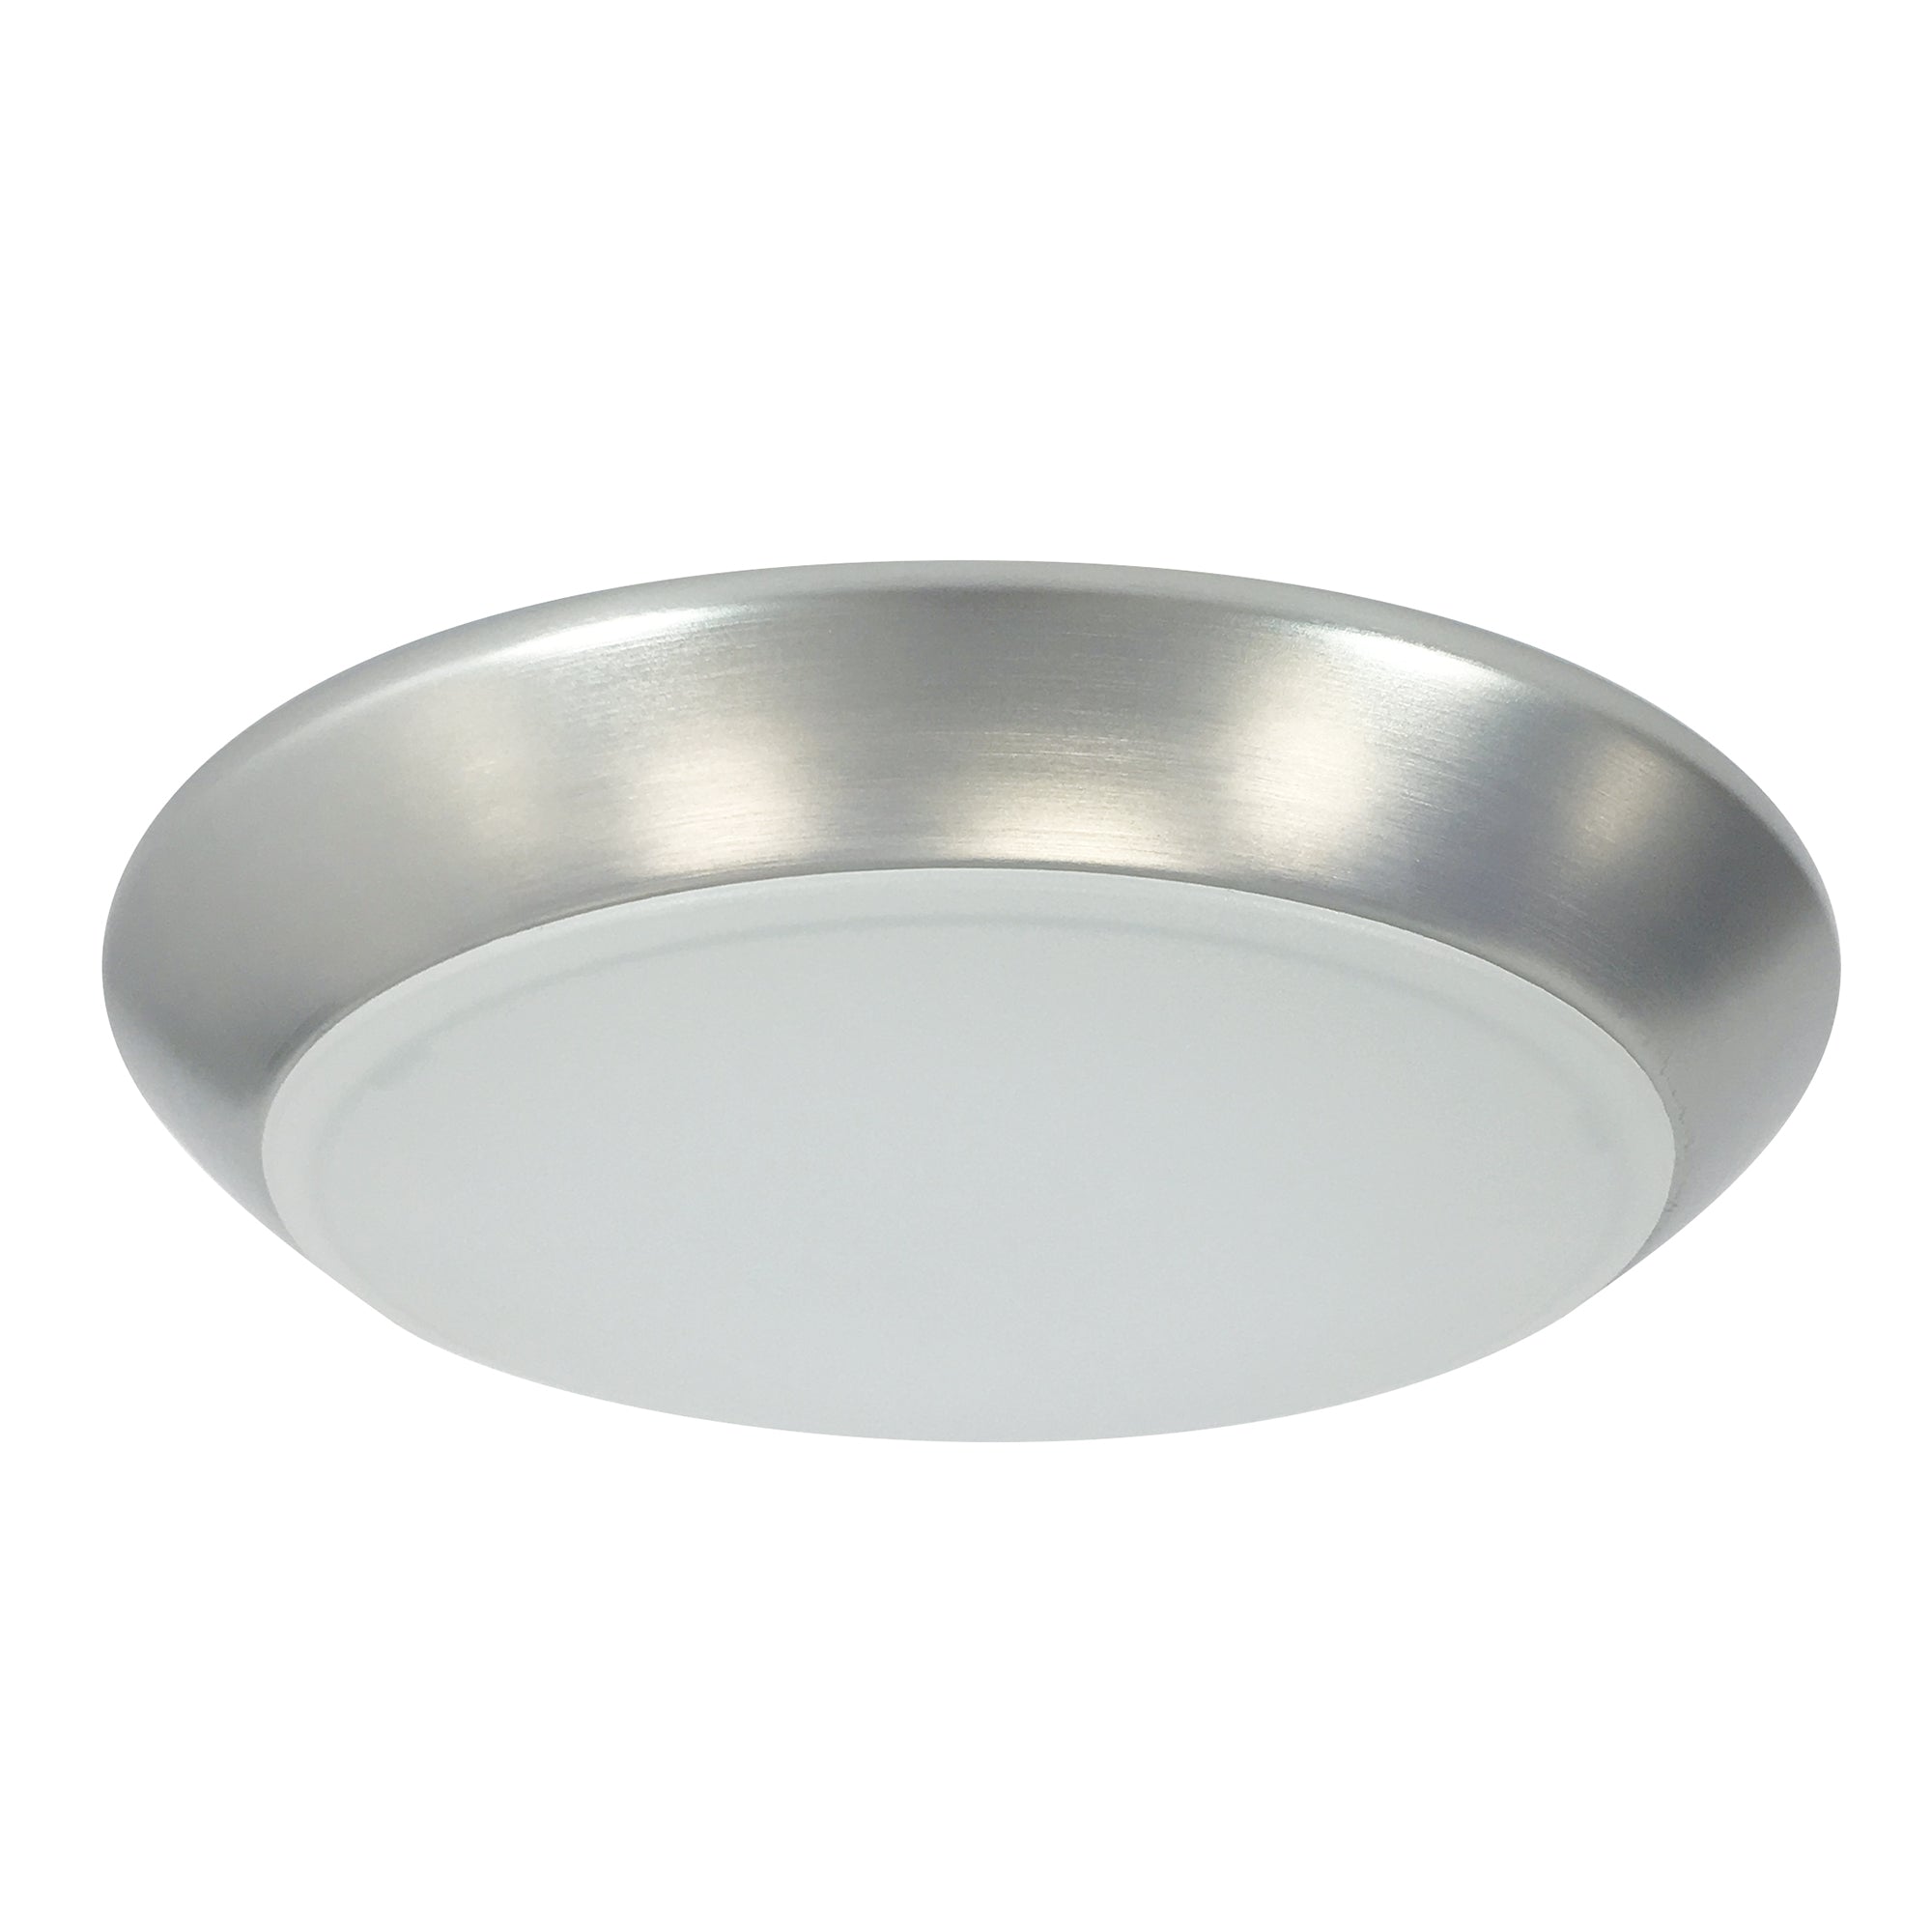 Nora Lighting NLOPAC-R8T2427NM - Surface - 8 Inch AC Opal LED Surface Mount, 2150lm / 32W, 2700K, Natural Metal finish